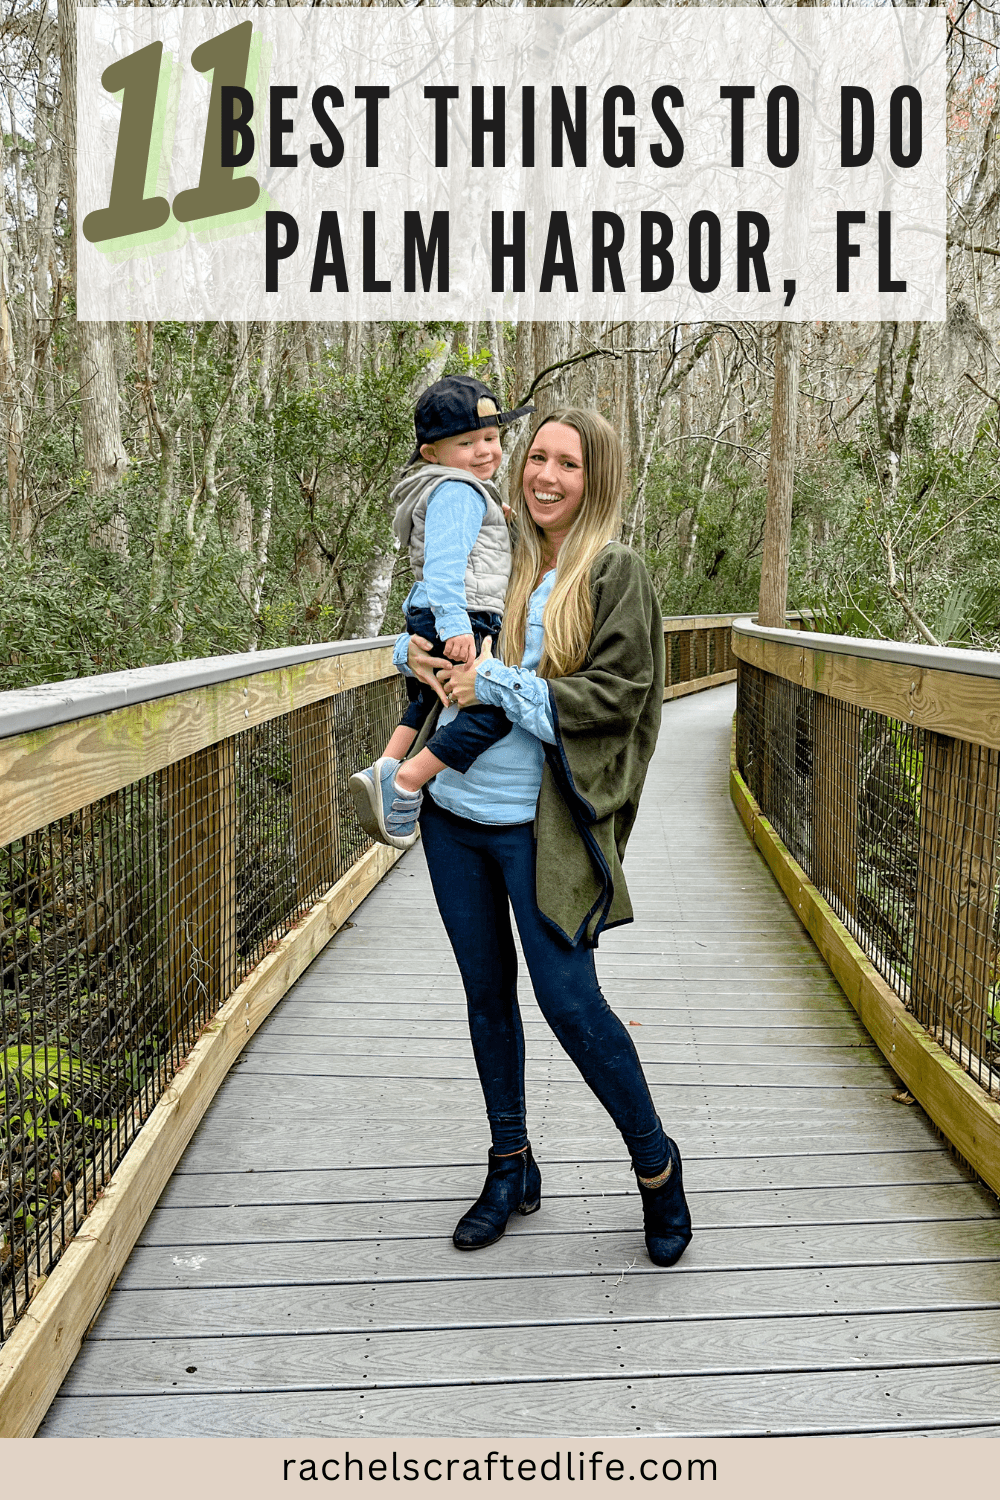 images of palm harbor florida